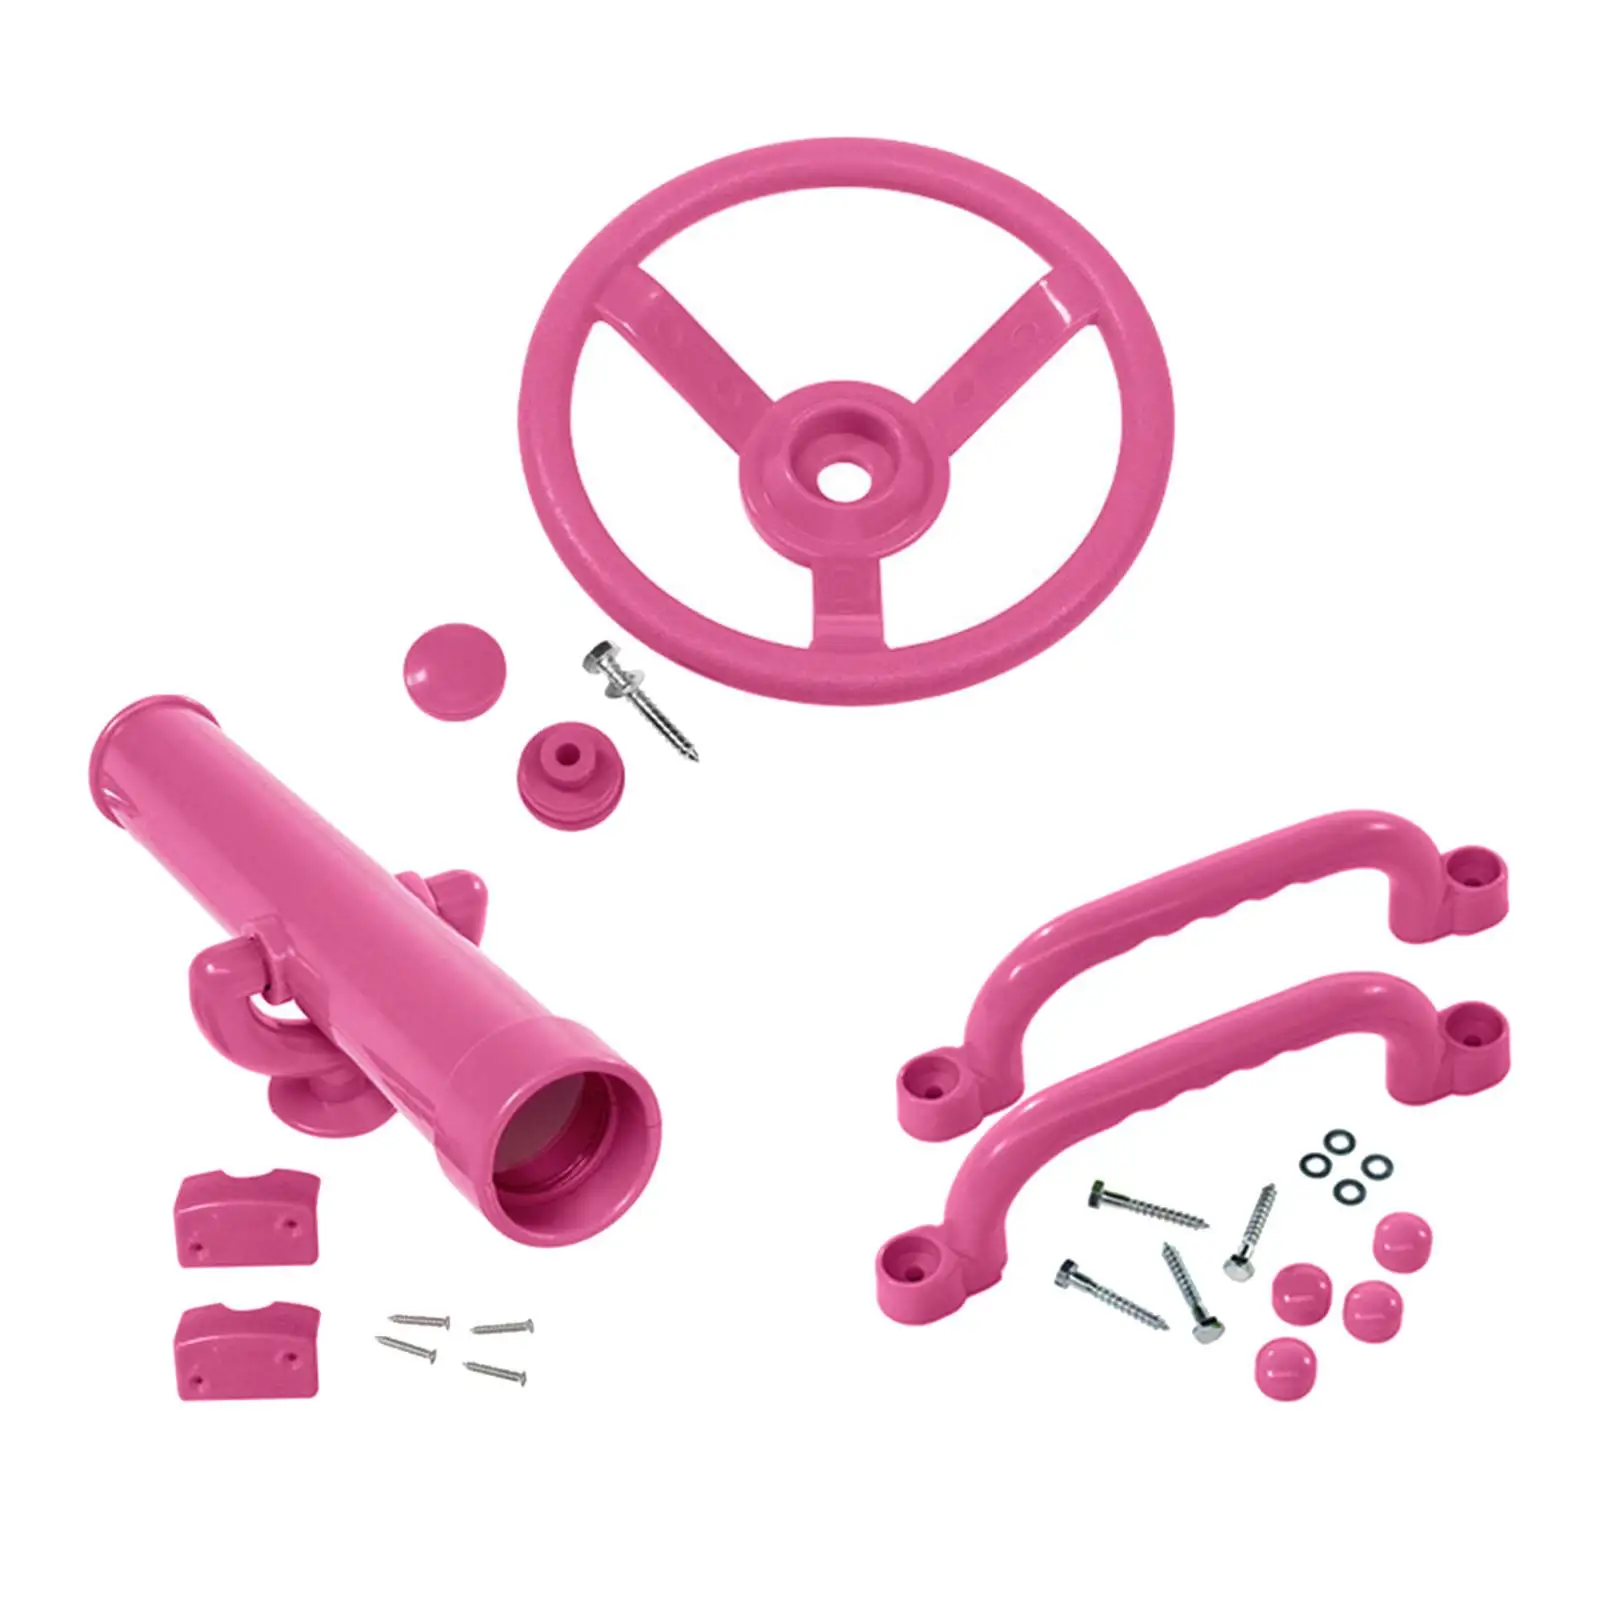 Playground Accessories Pink Set Easy to Install Valentines Day Gifts for Kids for Treehouse Jungle Gym Parts Attachments